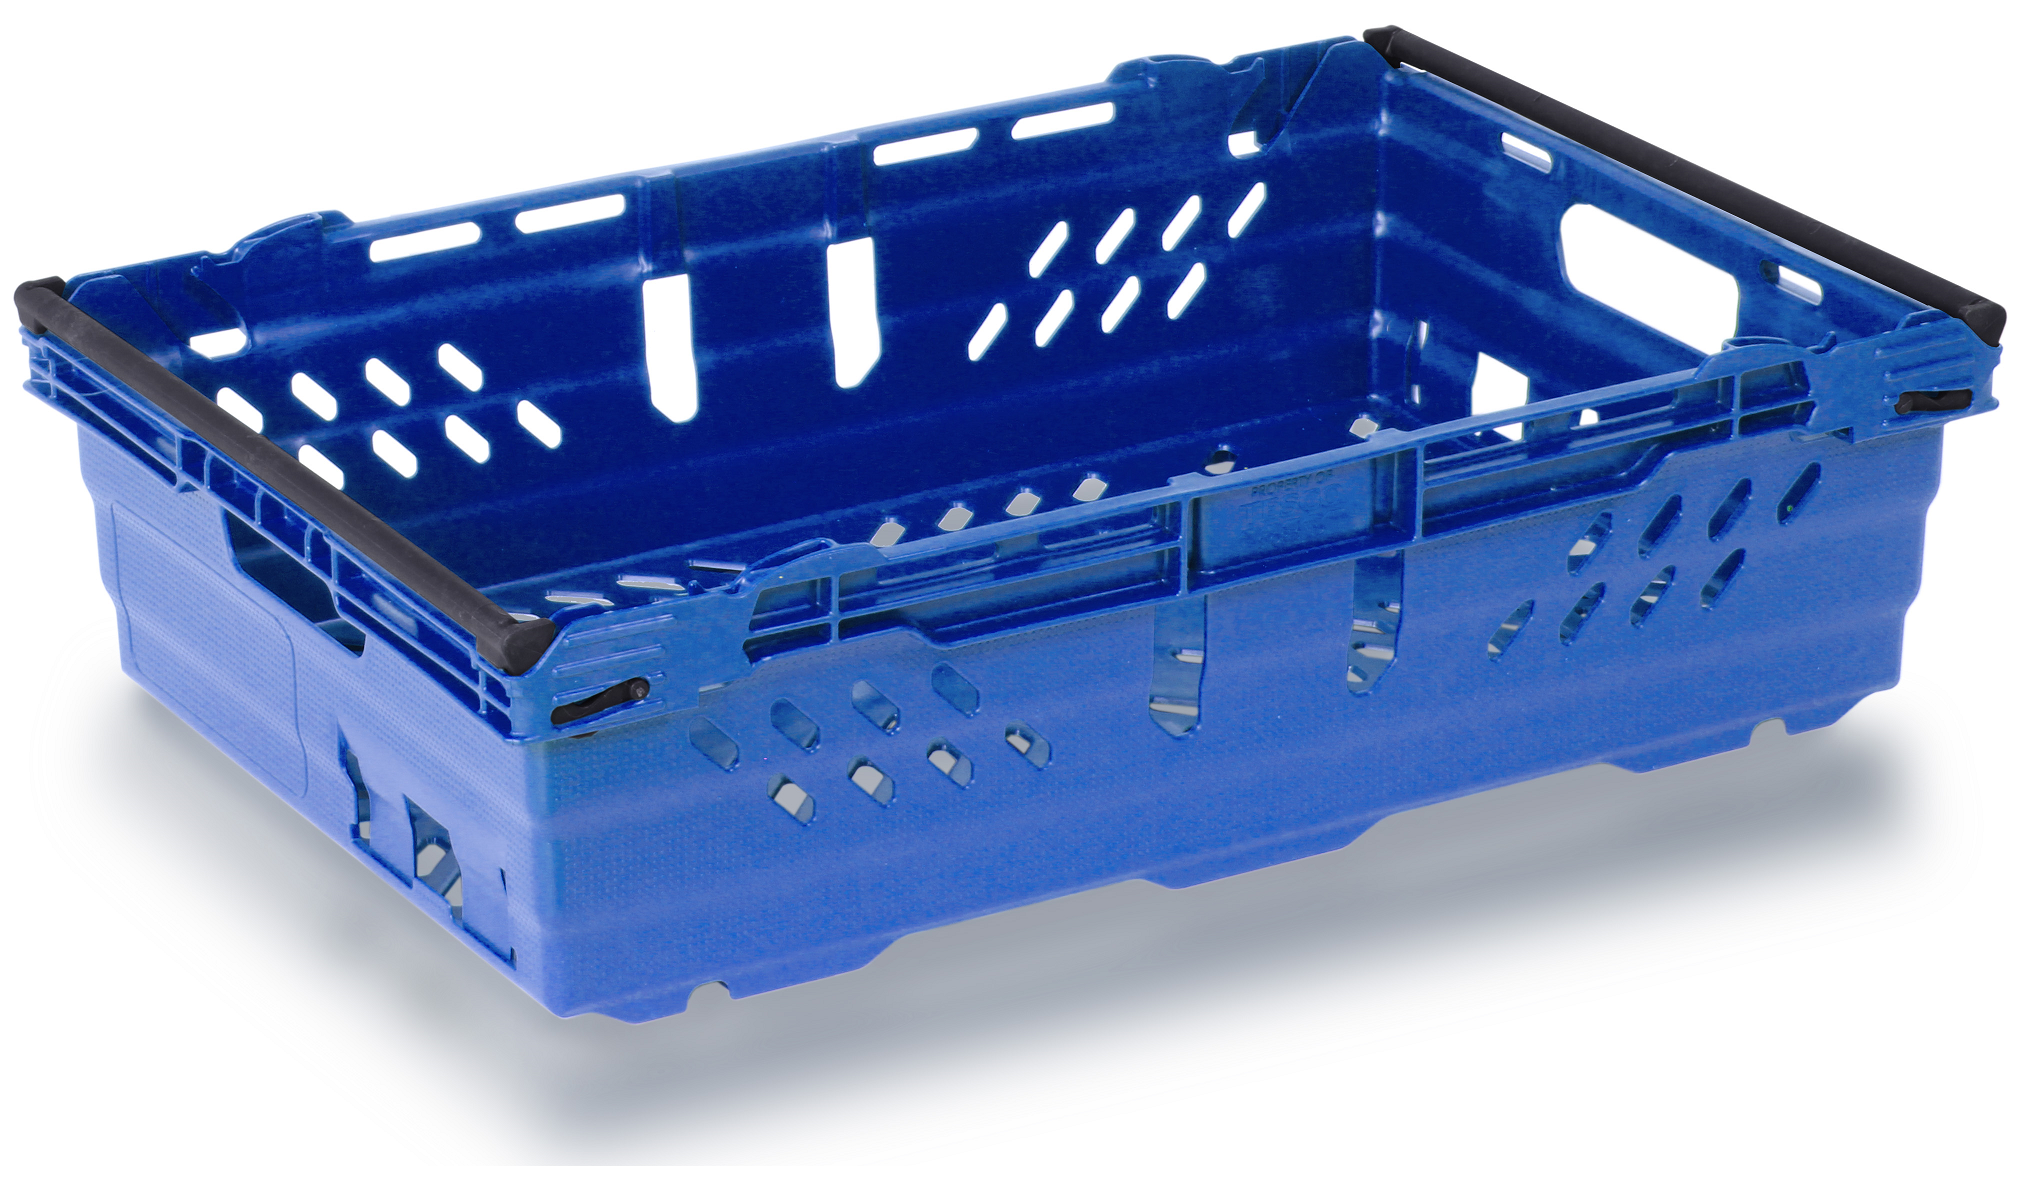 UK Suppliers Of 600x400x106 Bale Arm Crate - Blue For Supermarkets